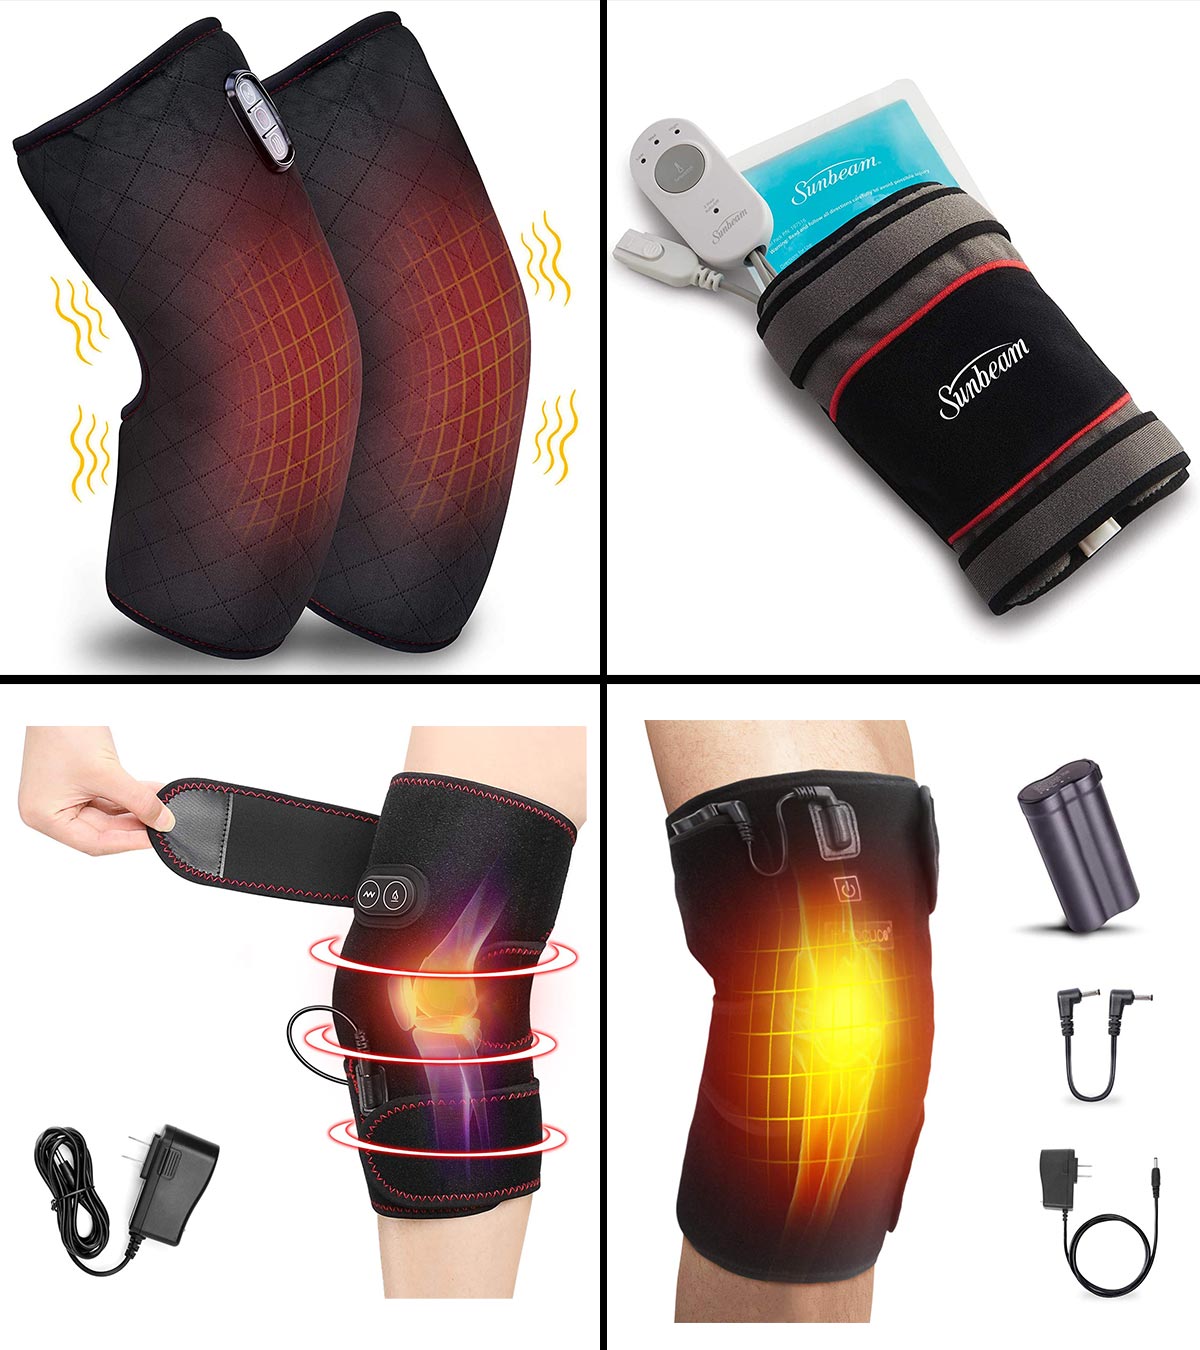 New Heating Knee Pads for Arthritis Knee Pain Relief USB Electric